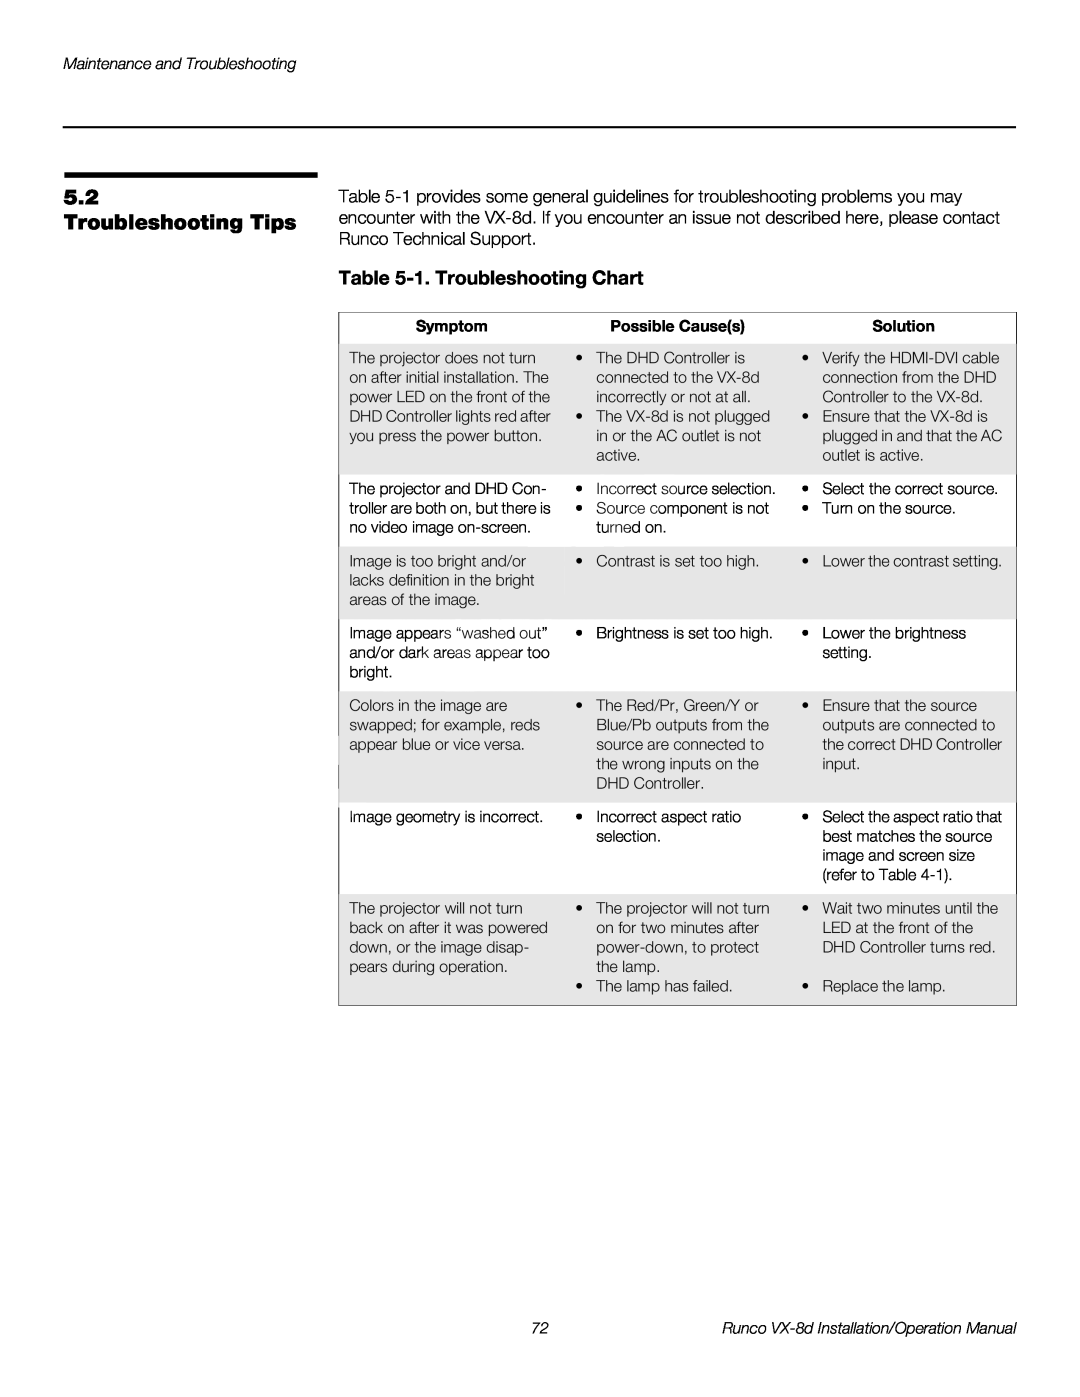 Runco VX-8D Troubleshooting Tips, 1. Troubleshooting Chart, Maintenance and Troubleshooting, Symptom, Possible Causes 